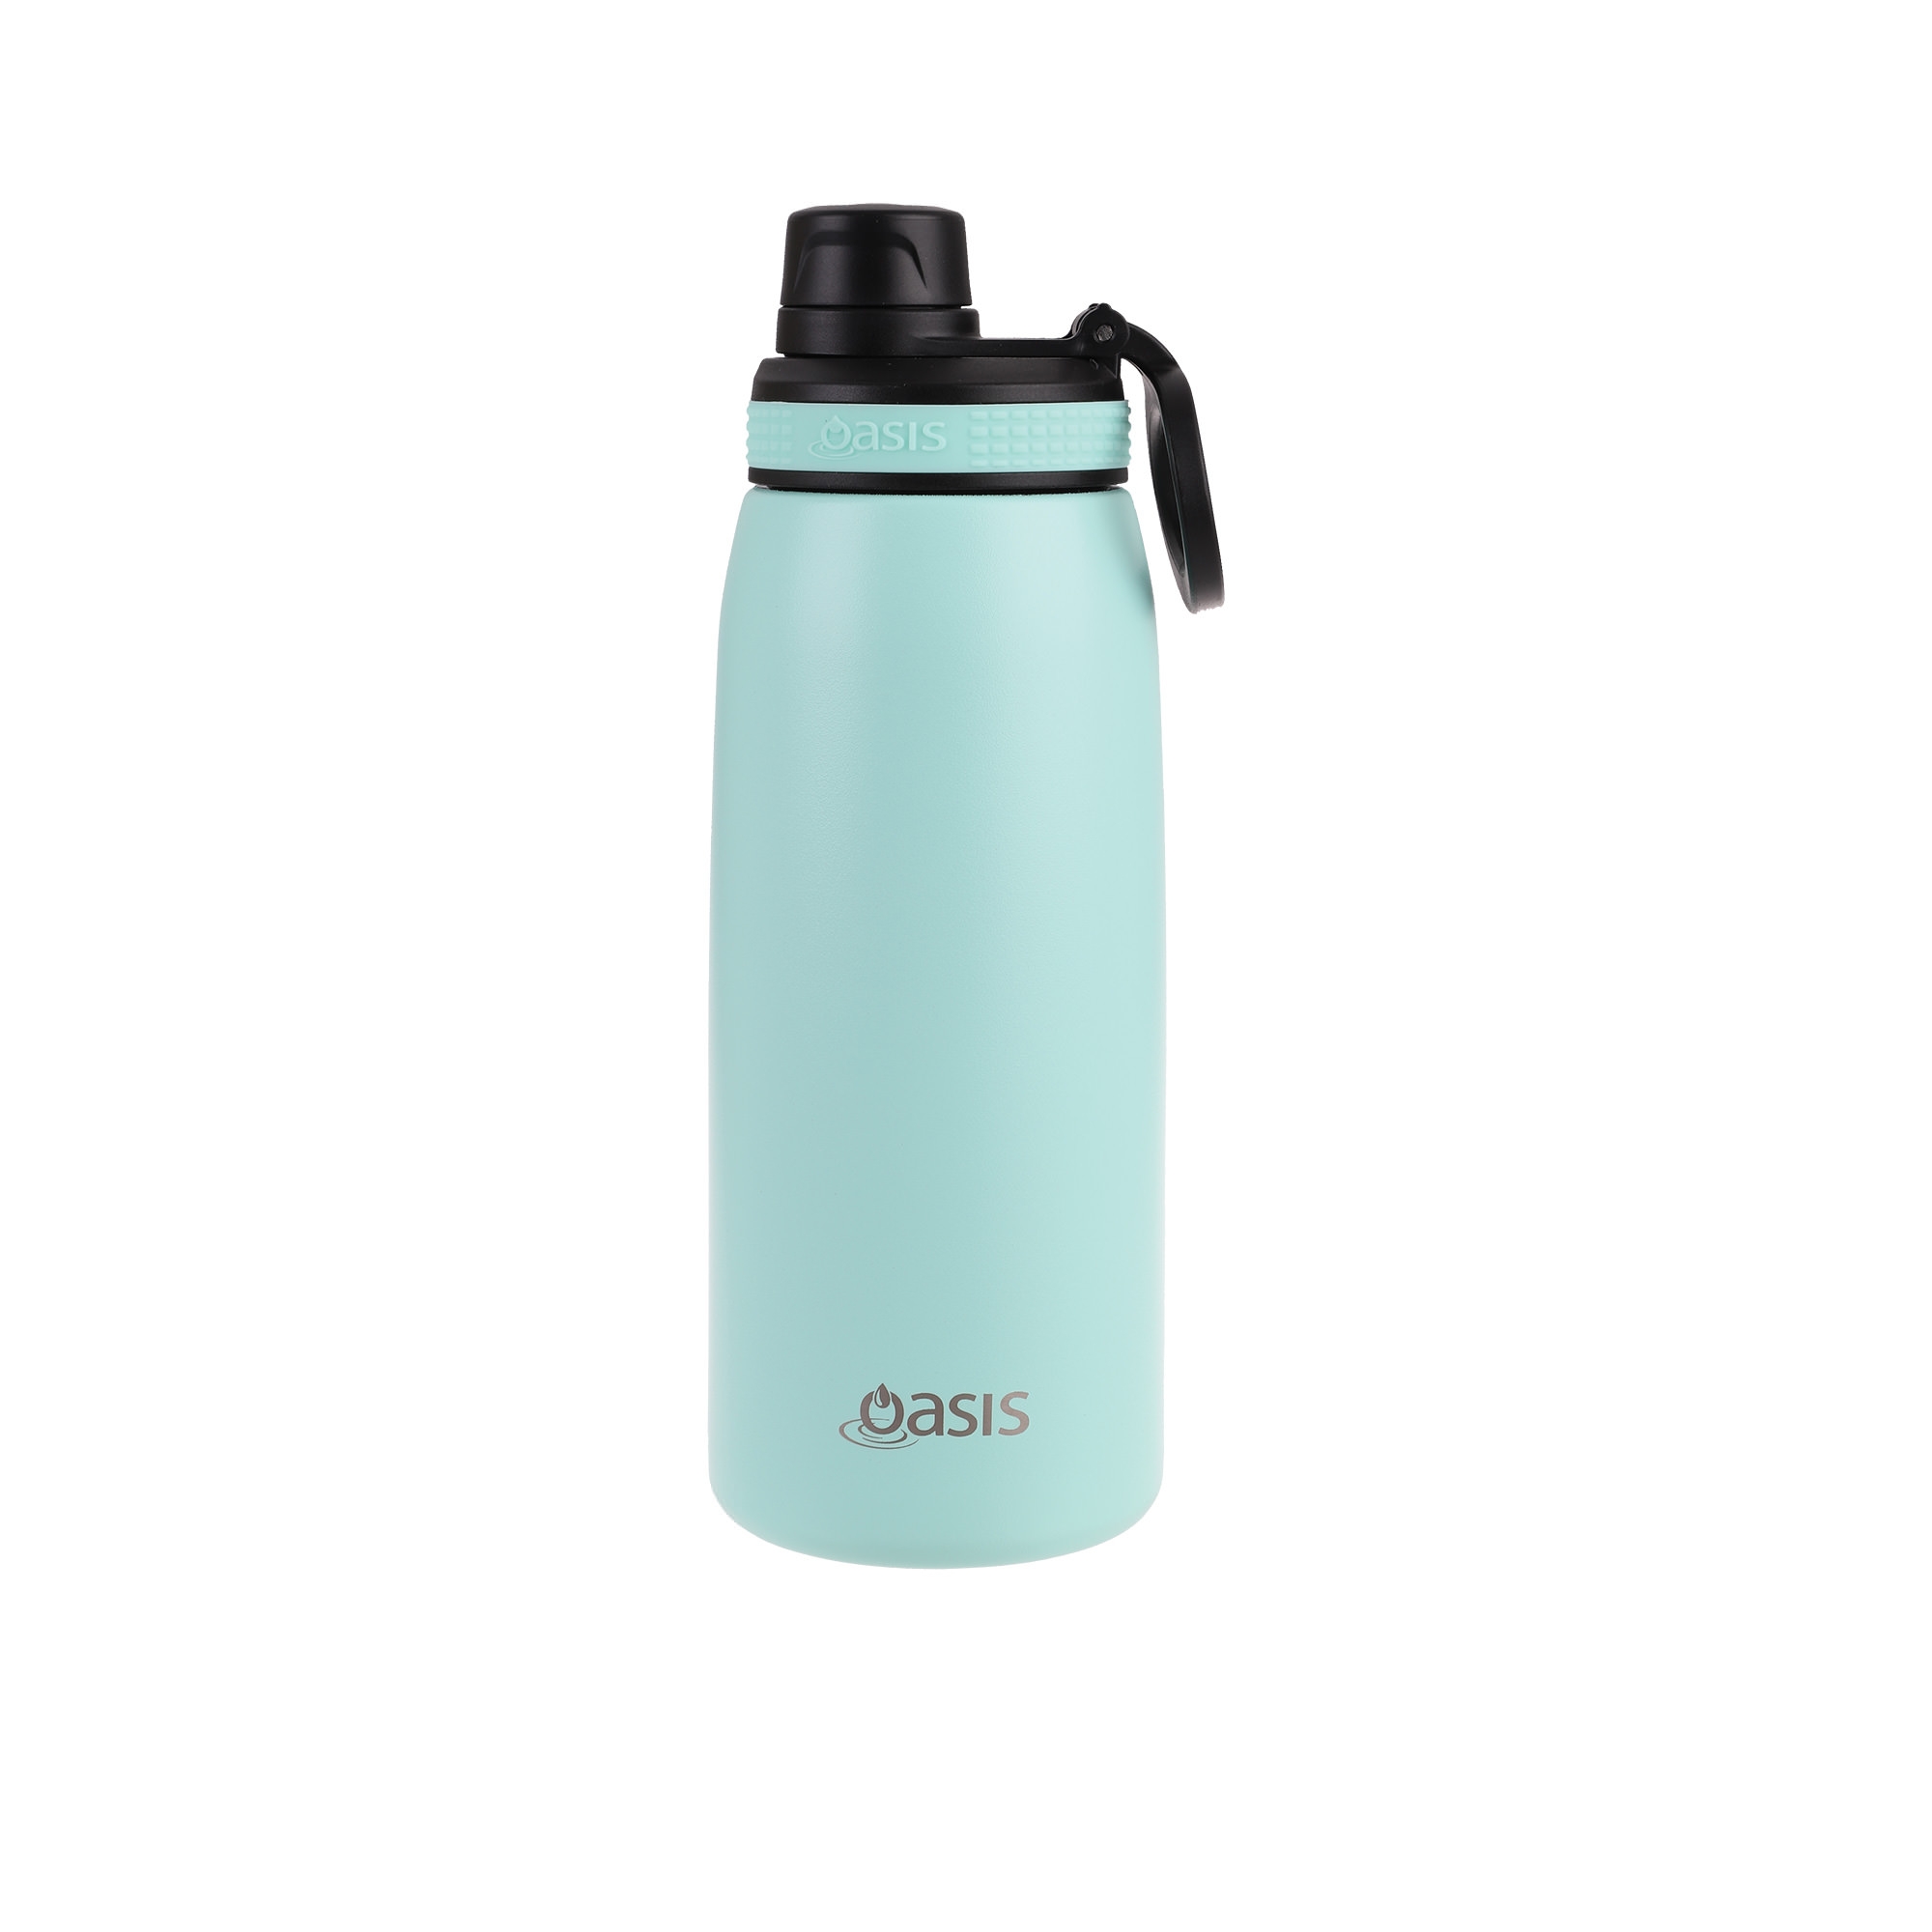 Oasis Double Wall Insulated Sports Bottle 780ml Mint Image 1